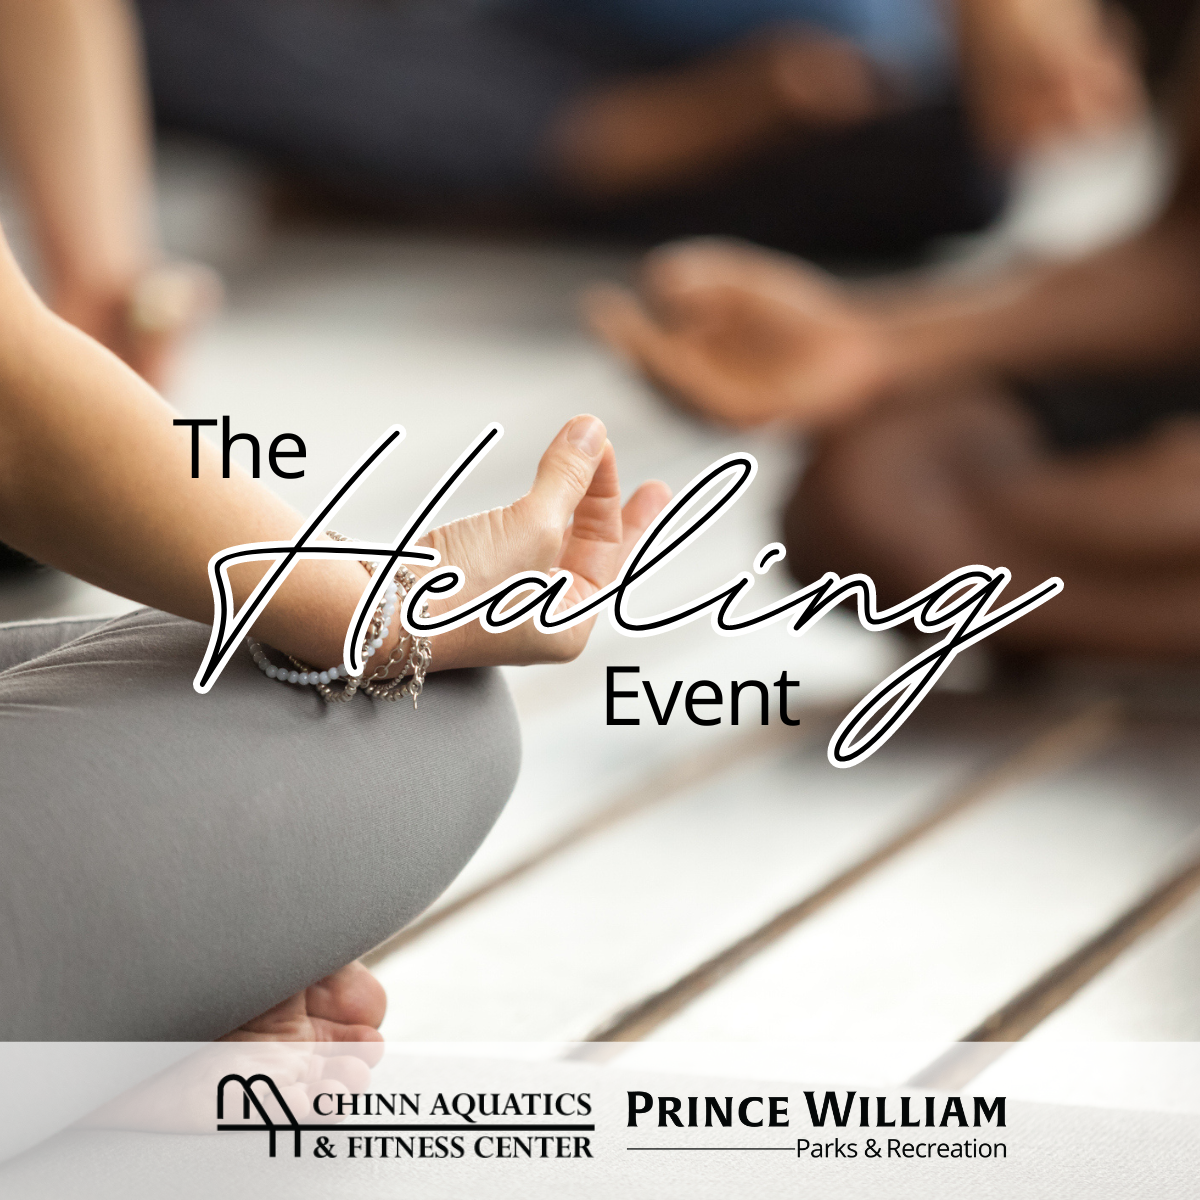 The Healing Event